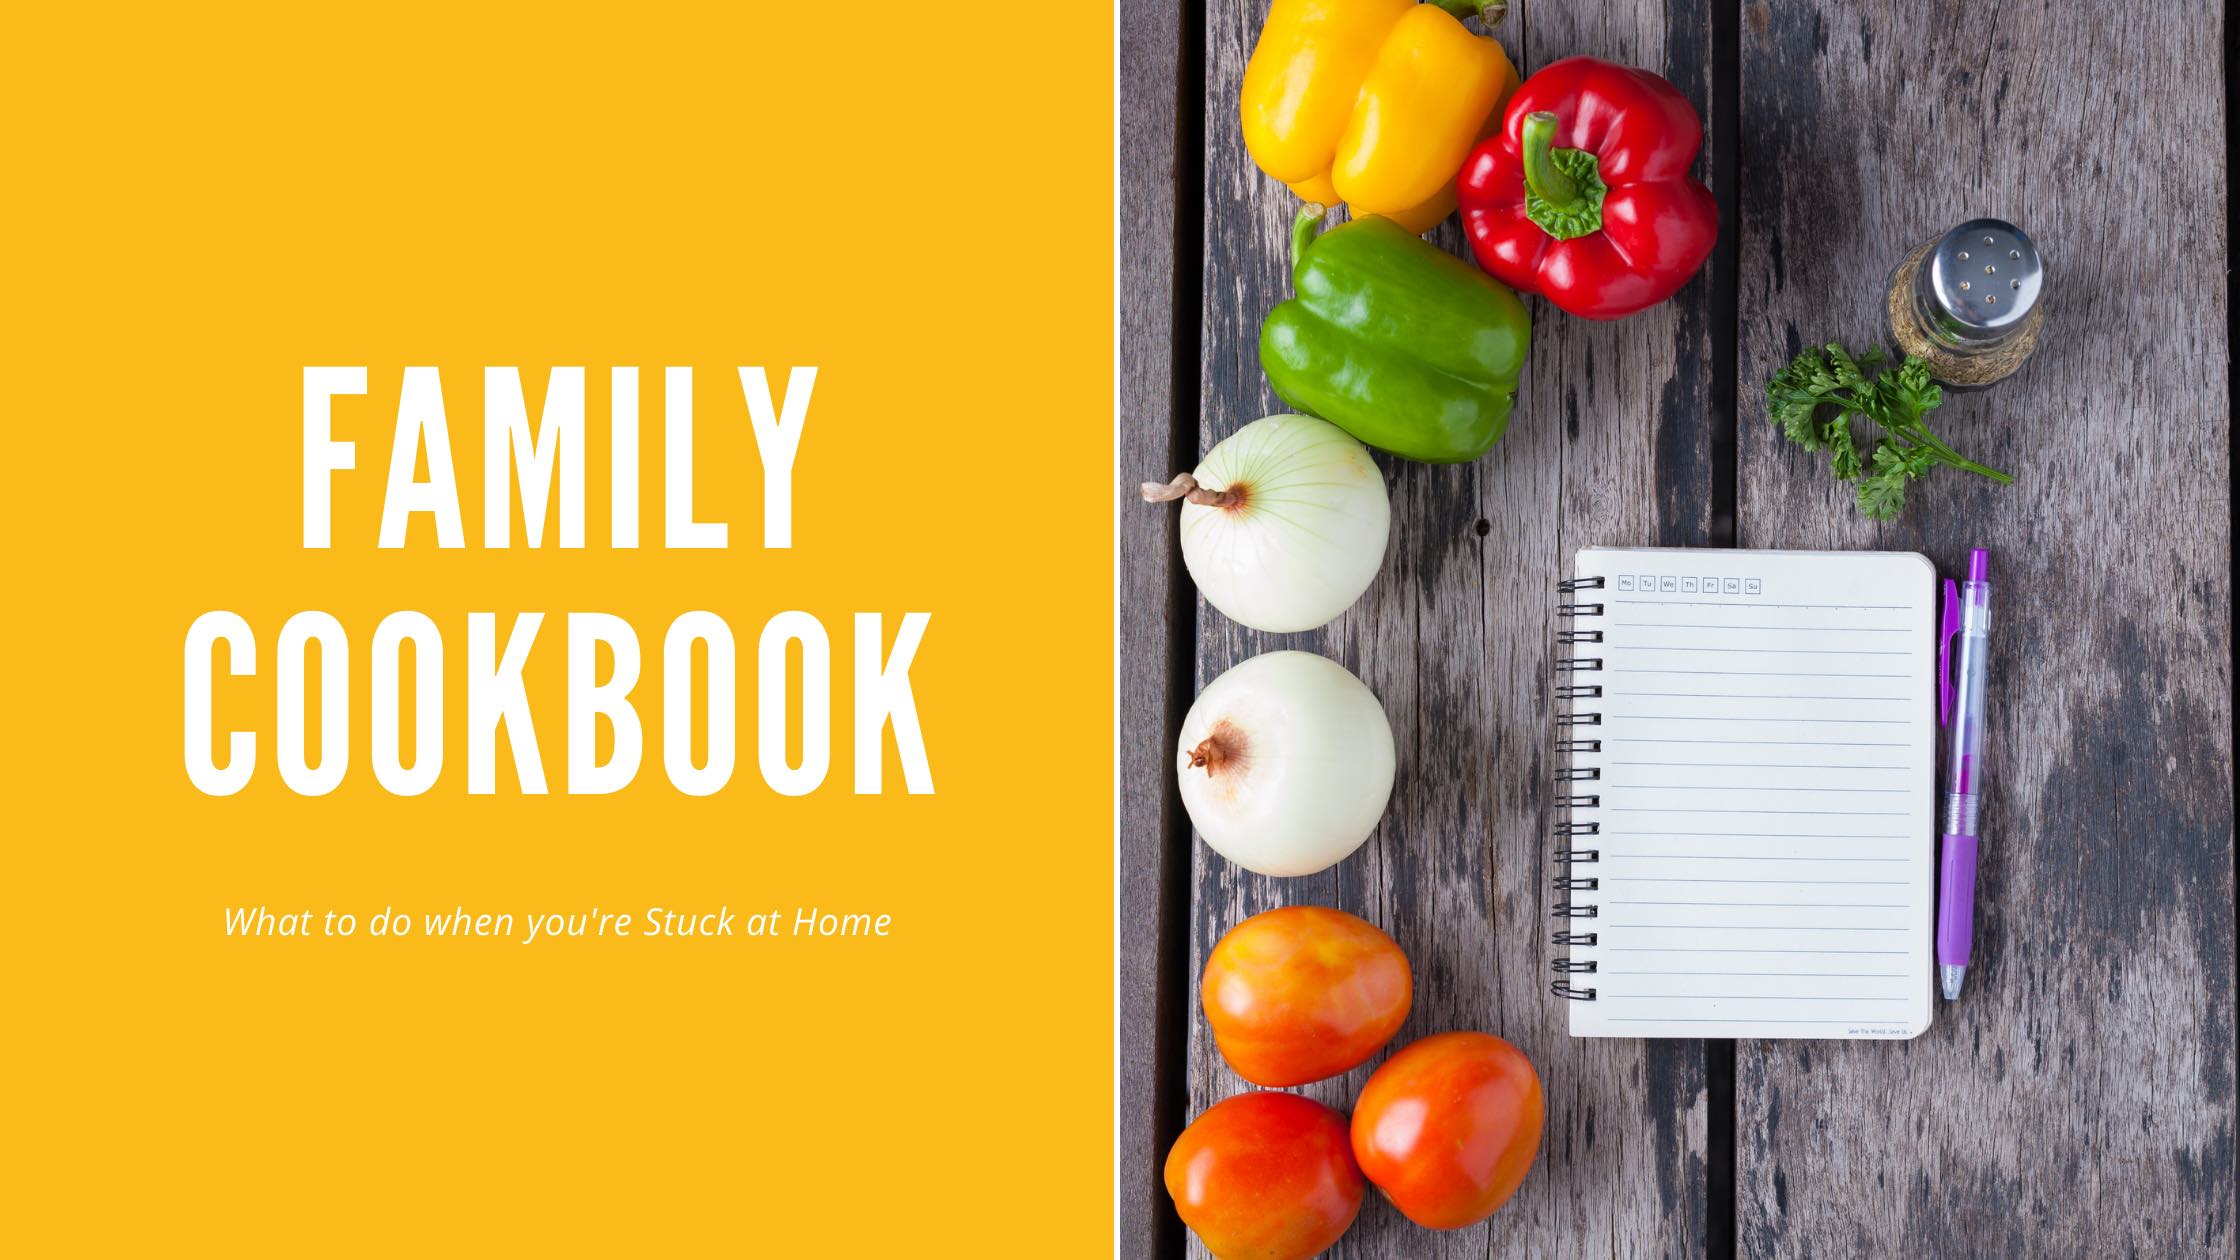 A fun thing to do while you're stuck at home is to make a family cookbook.